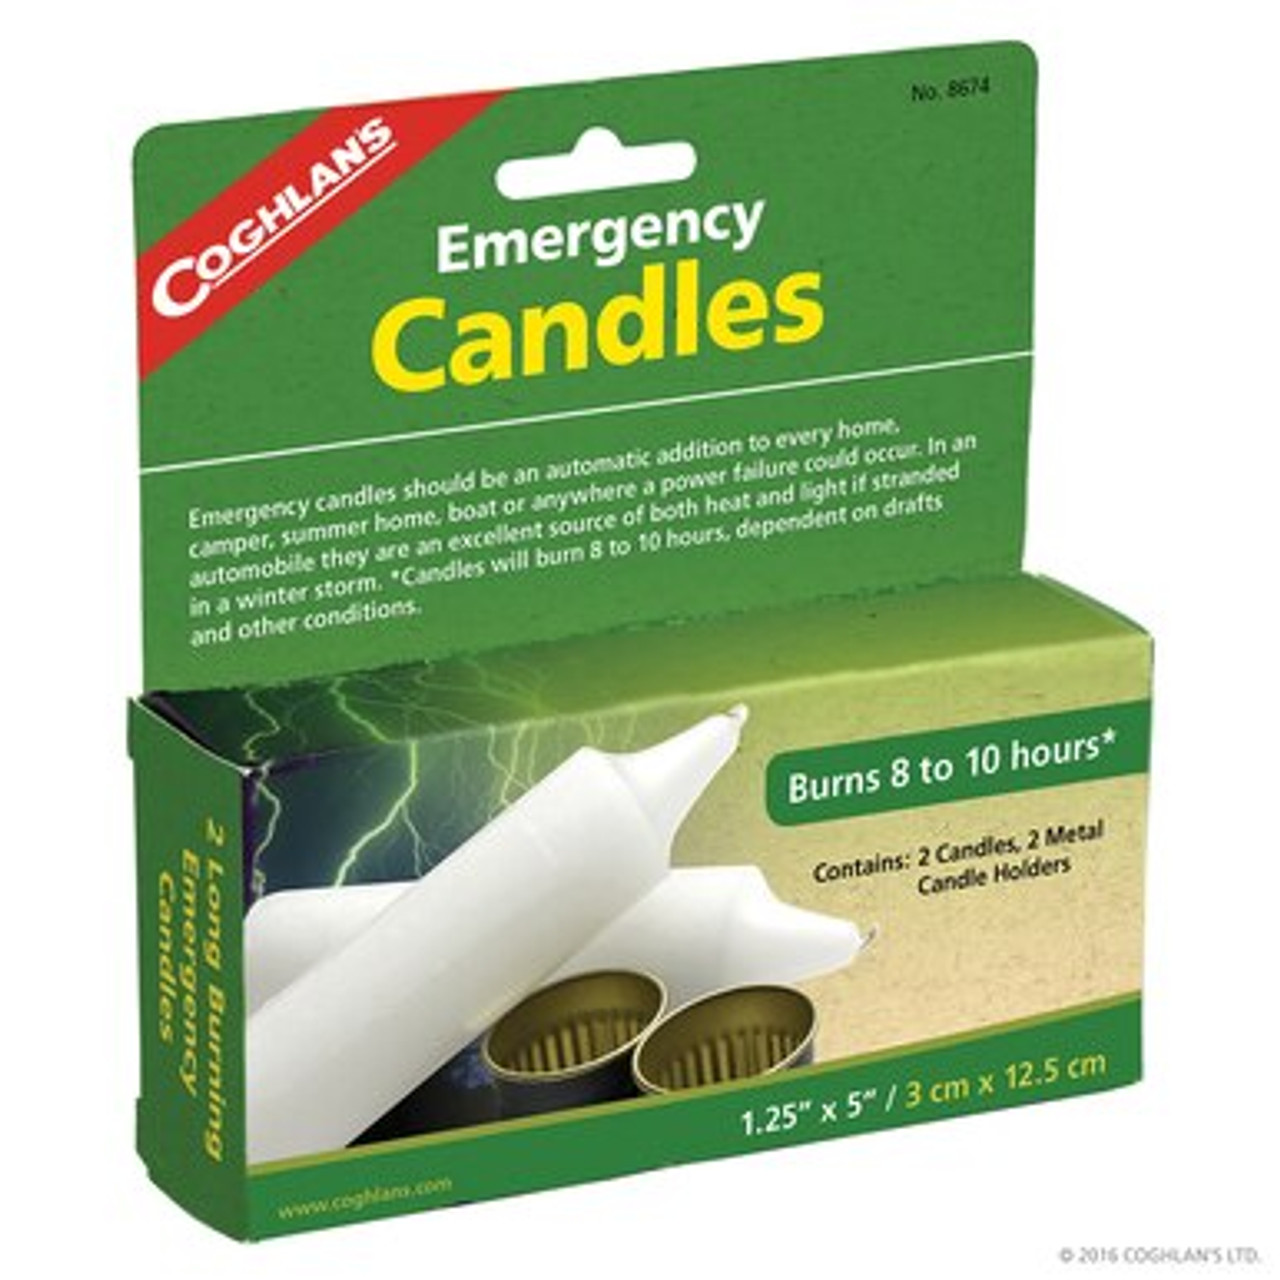 https://cdn11.bigcommerce.com/s-ovptlwt64t/images/stencil/1280x1280/products/553/1977/LONG-LASTING-EMERGENCY-CANDLES-1__06482.1594140838.jpg?c=1